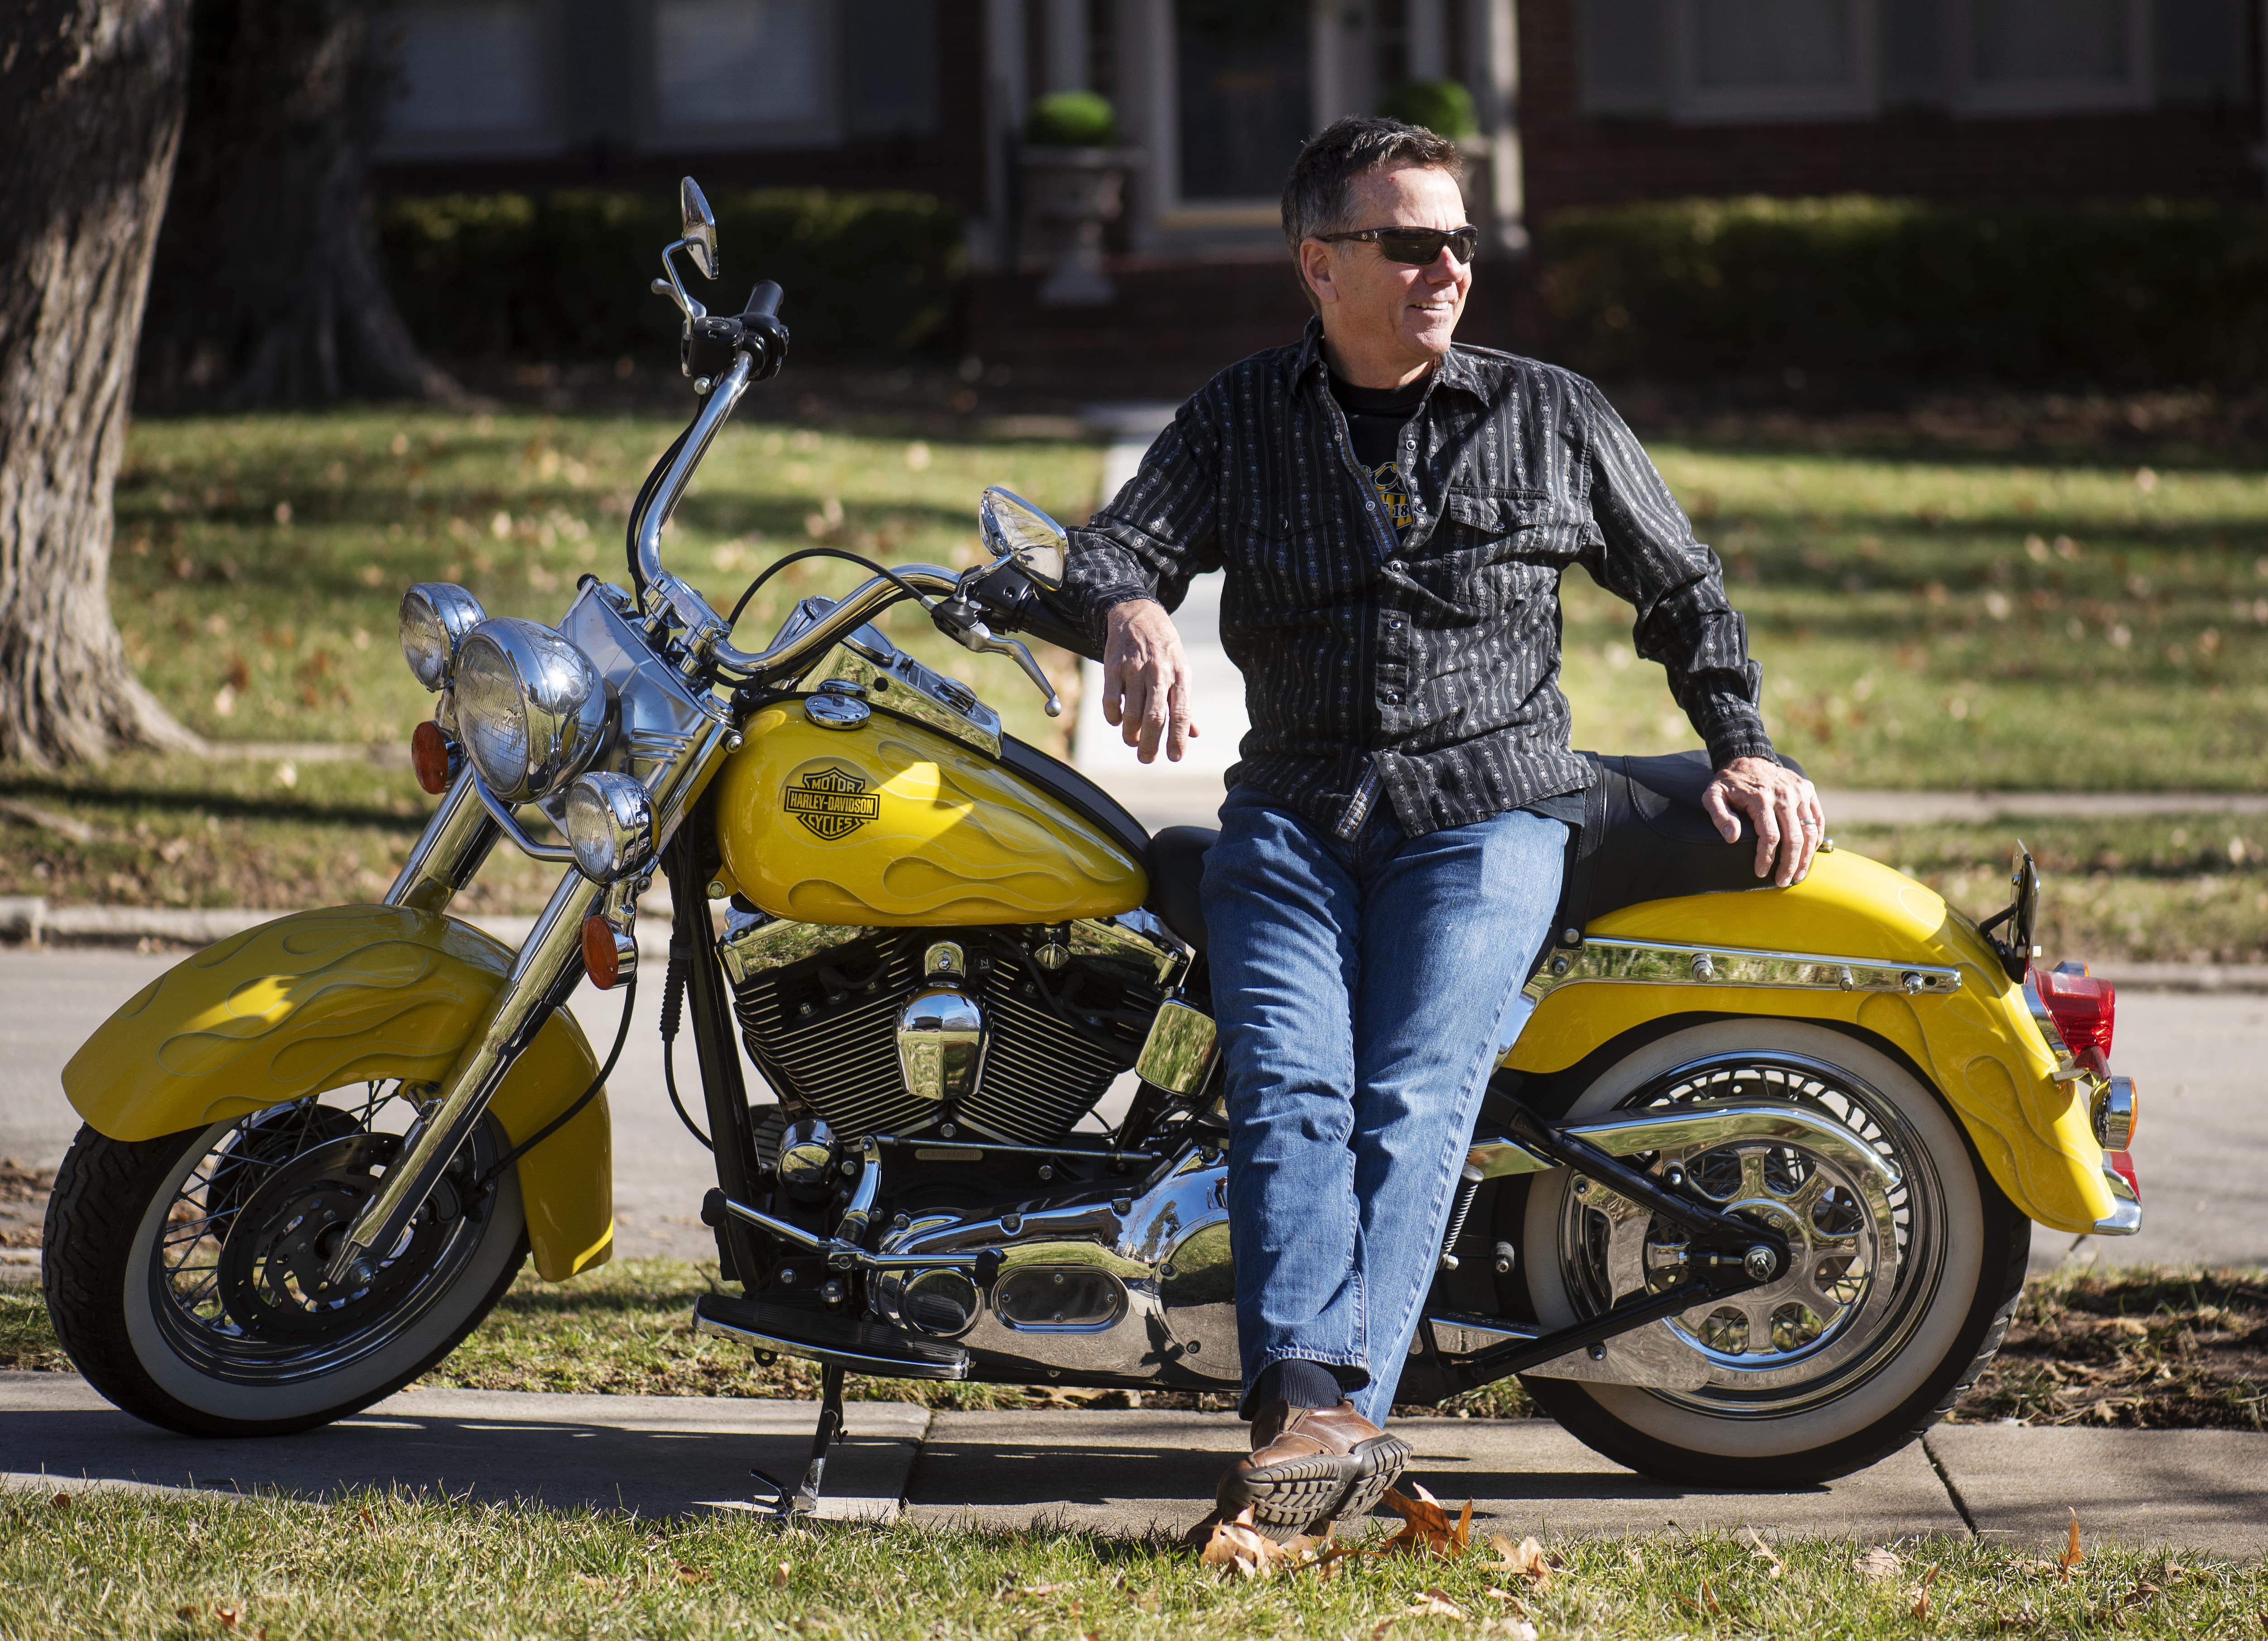 Orthodontist, Dr. Robinson sitting on a yellow motorcycle.